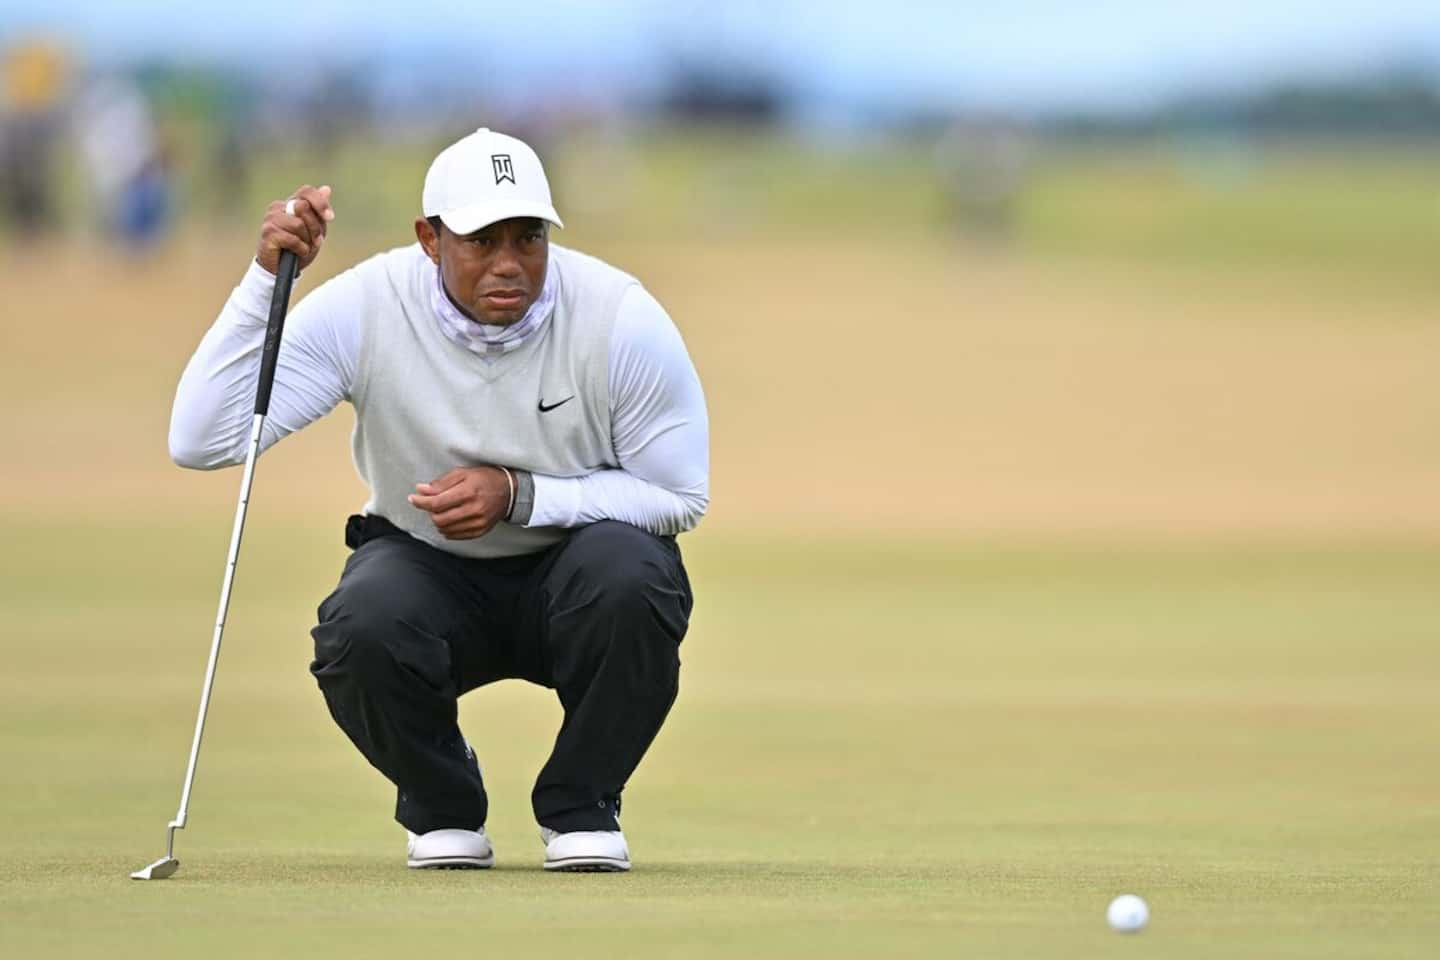 Tiger Woods turned down $700-800m to join LIV Golf